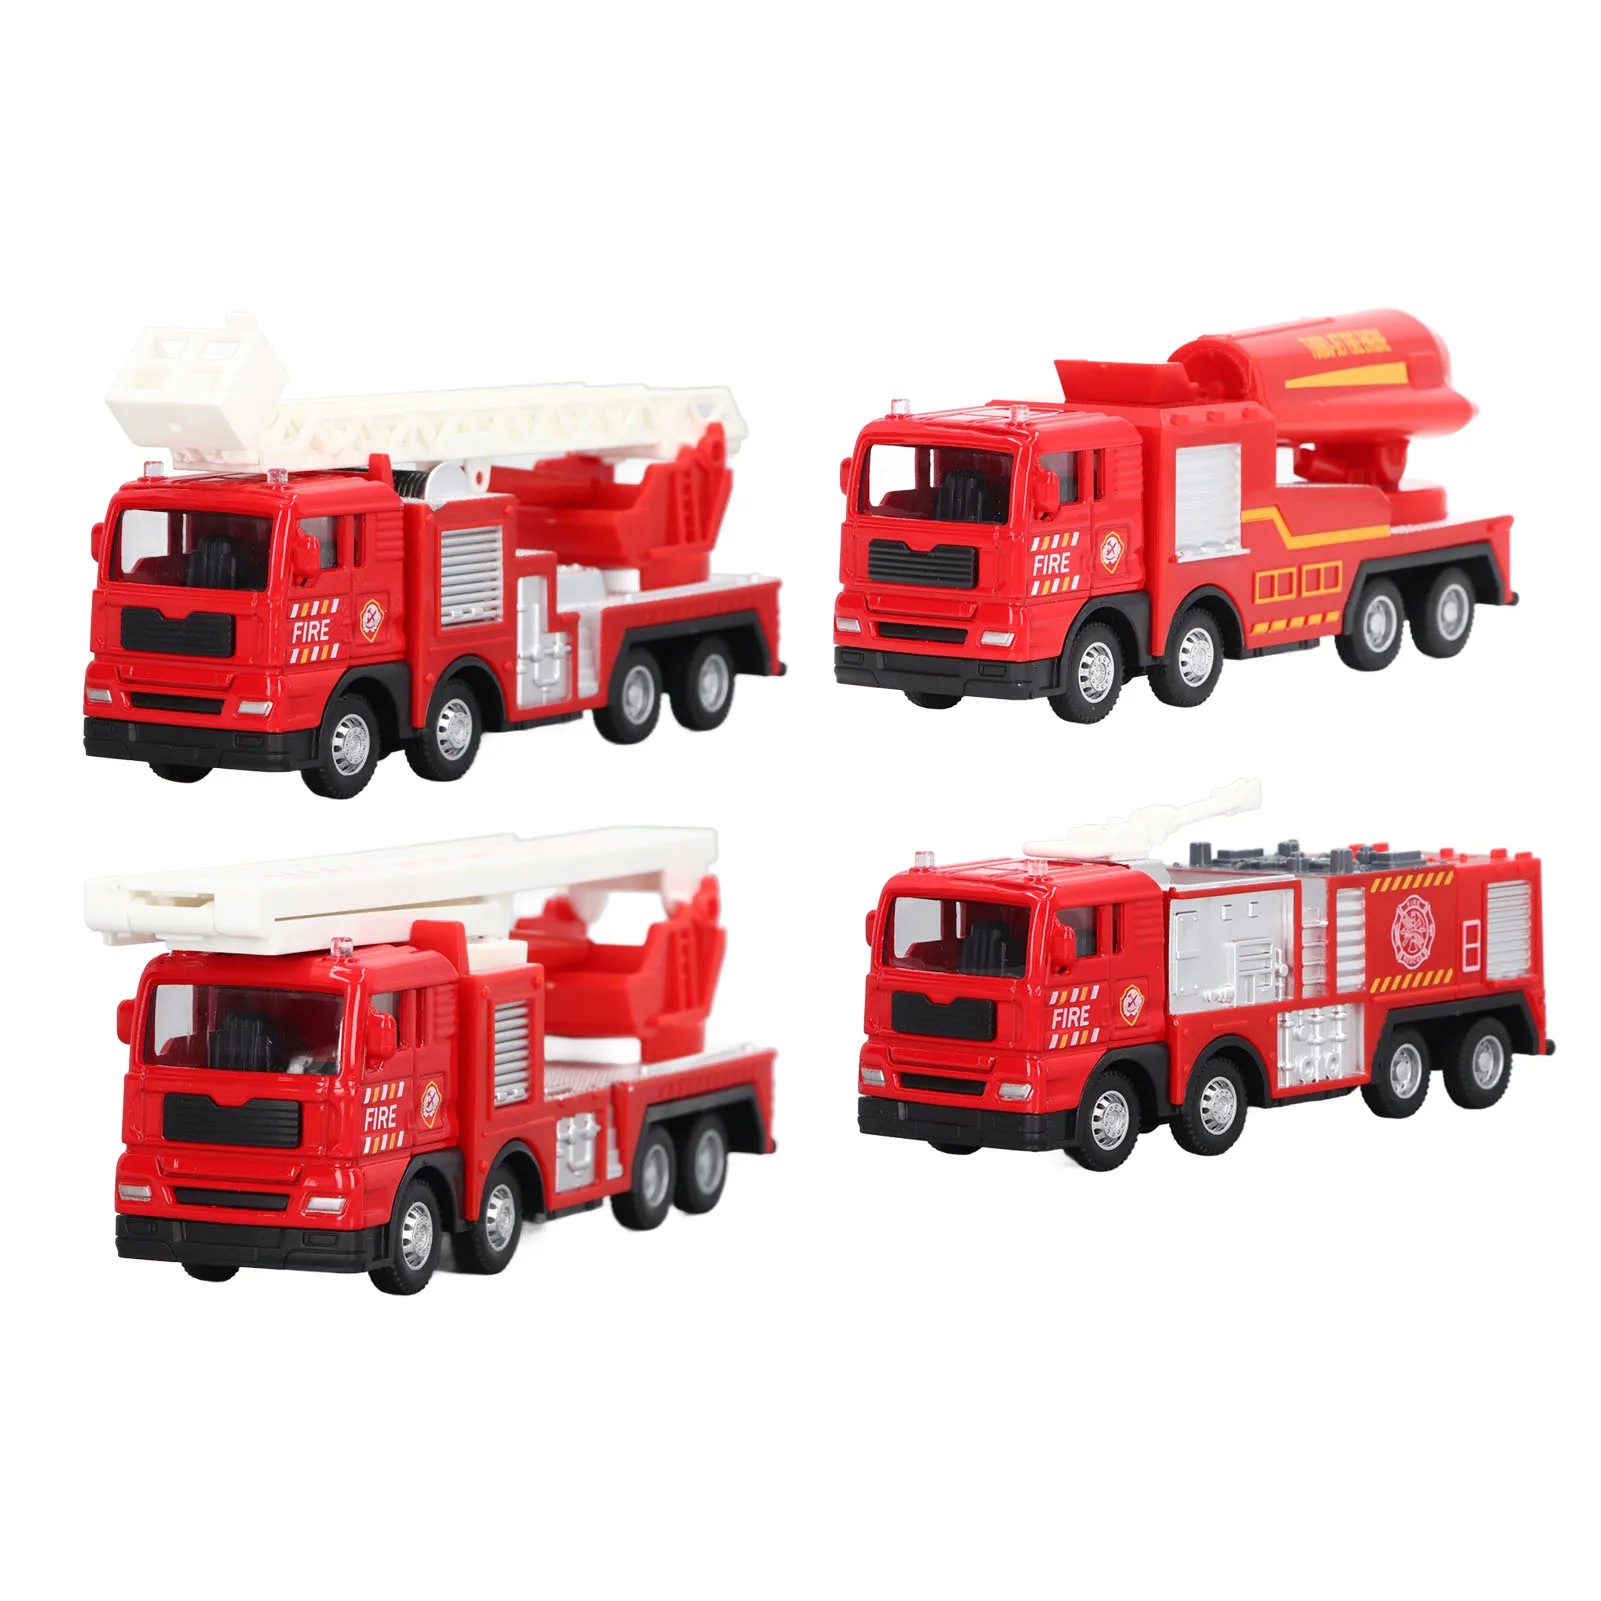 1:55 Fire Truck Toy Alloy Simulation Fire Ladder Truck Sprinkler Truck Tower Crane Toy For Home Decoration Birthday Gift 4w filament bulb vintage brown e14 led flame 220v candle lamp simulated nature fire flickering light for bar pub home decoration